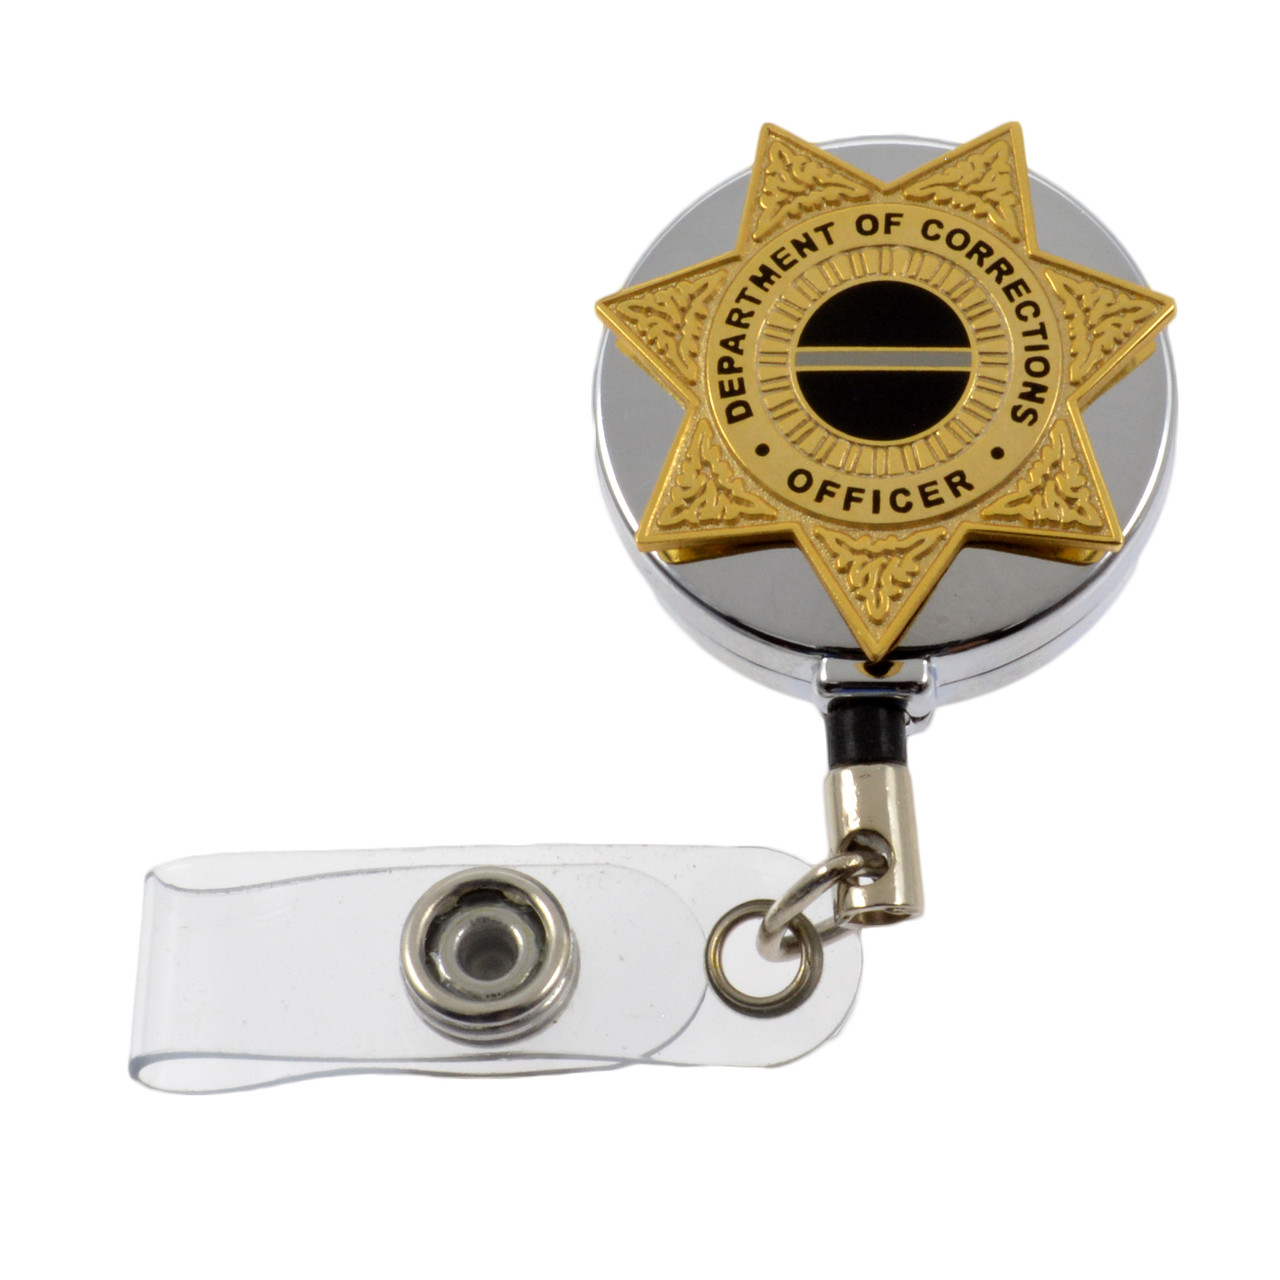 https://cdn11.bigcommerce.com/s-tqsou4yk2f/images/stencil/1280x1280/products/1025/6869/7-point-star-corrections-officer-badge-reel-chrome__71043.1628088534.jpg?c=1